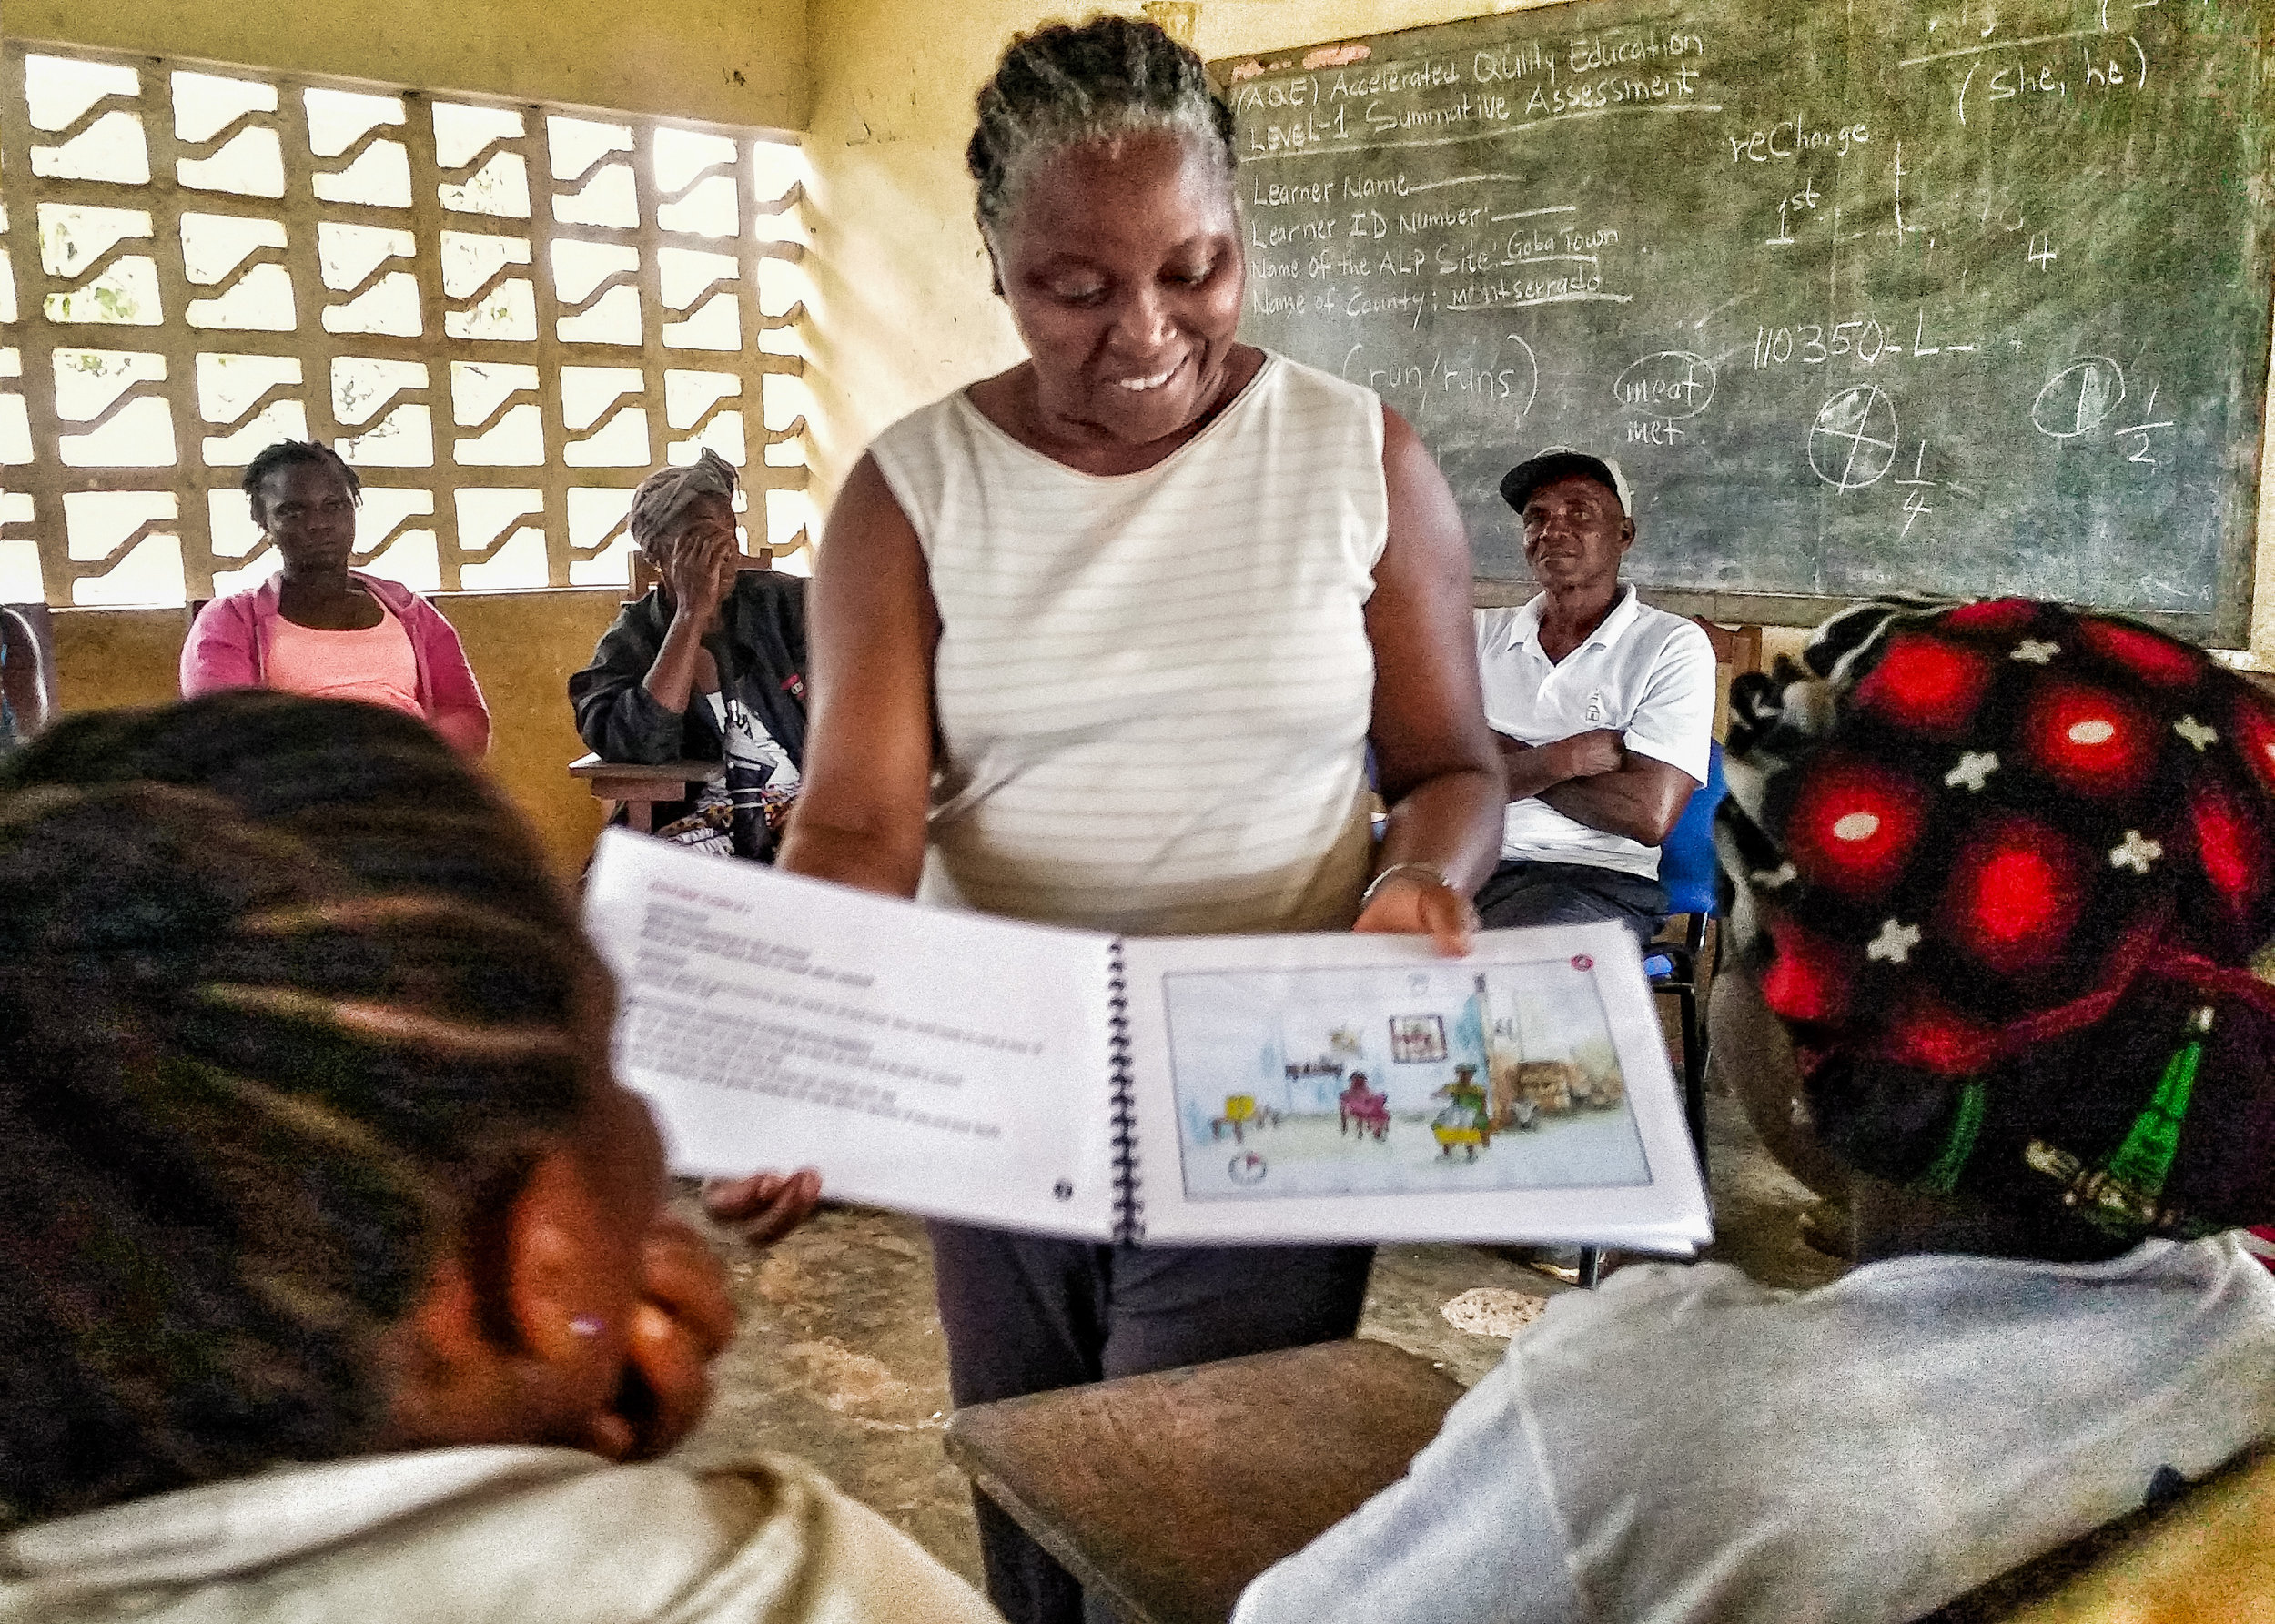  Comfort Summerville, Coordinator for Dropout Prevention at the Ministry of Education. The Ministry of Education's Community Engagement Unit joined USAID Read Liberia's Community Engagement Team to engaged&nbsp;parents and teachers through peer educa